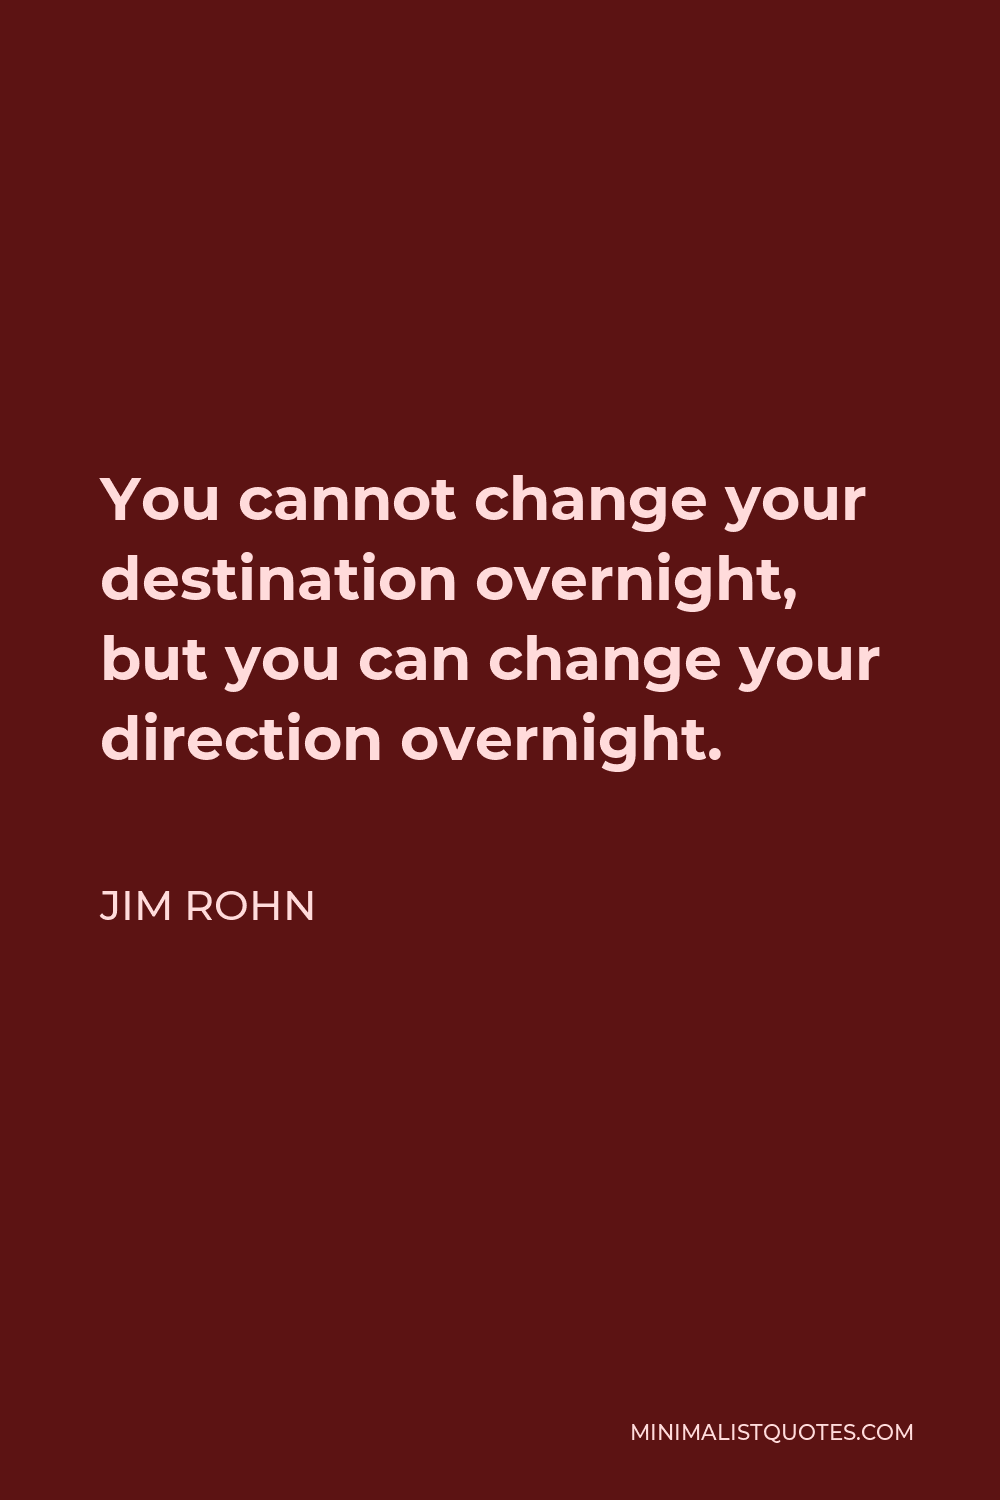 Jim Rohn Quote - You cannot change your destination overnight, but you can change your direction overnight.